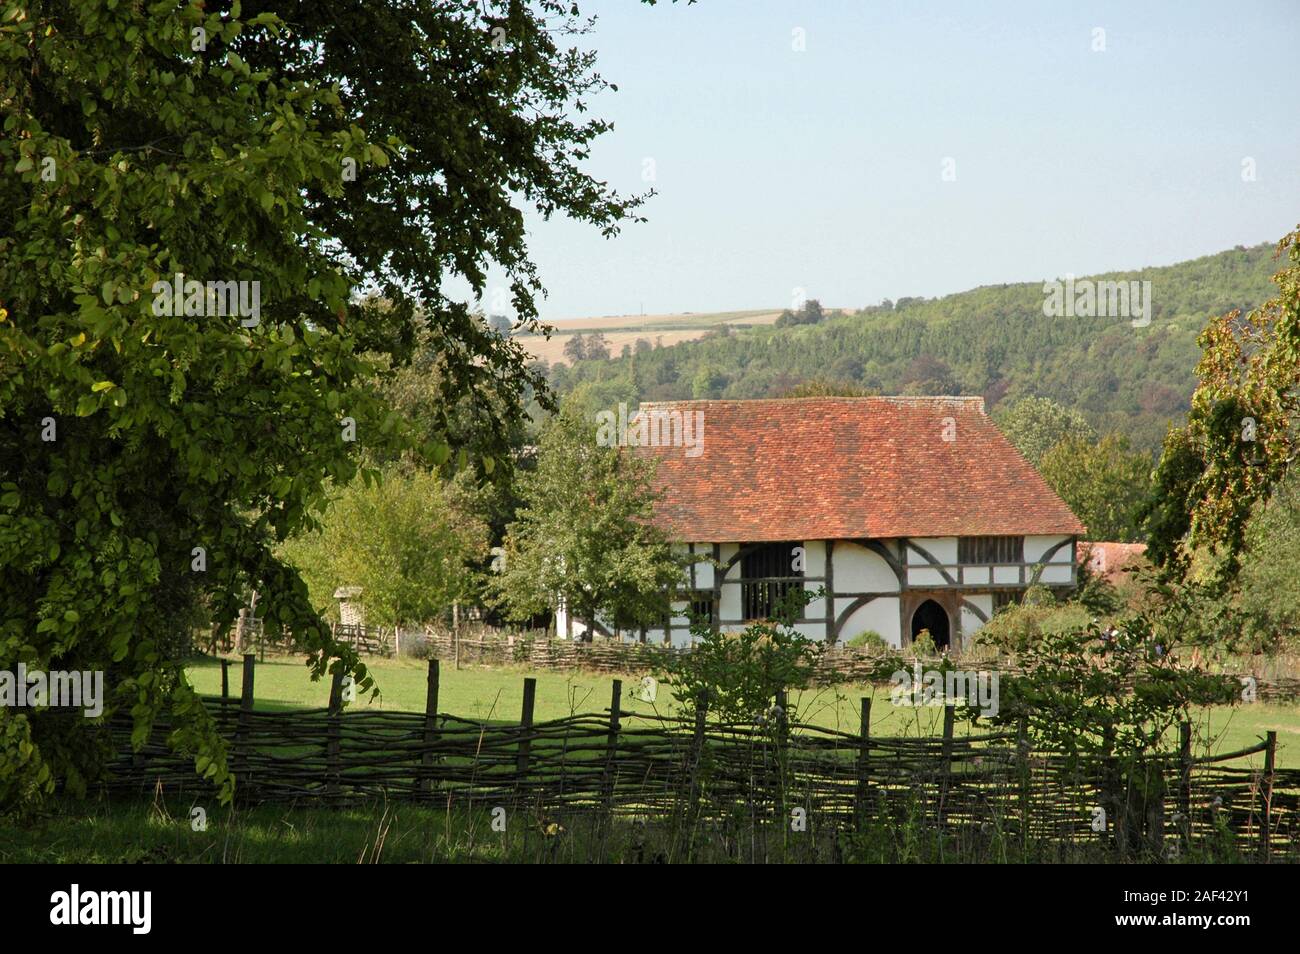 Bayleaf Farmhouse, early fifteenth century, from Chiddingstone, Kent, at Weald and Downland Open Air Museum, West Sussex. Stock Photo